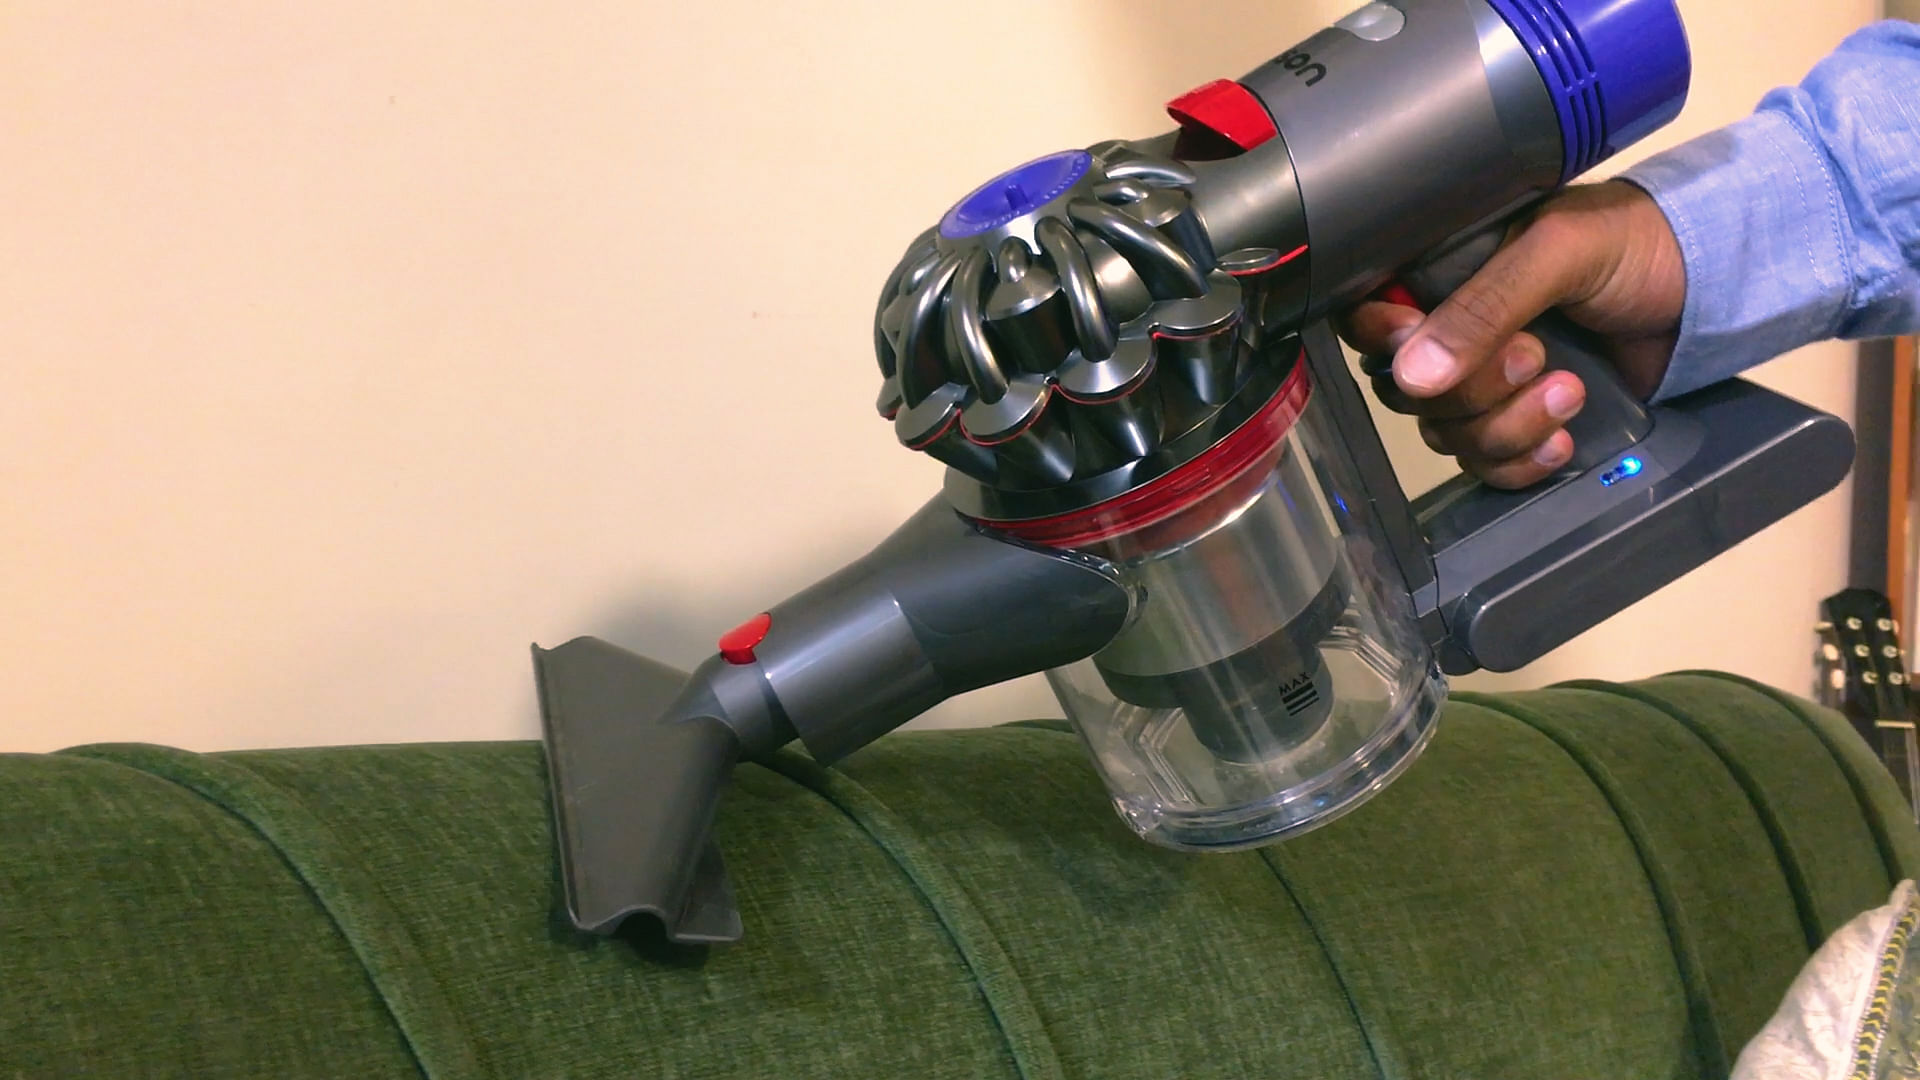 The Dyson V8 Absolute vacuum cleaner